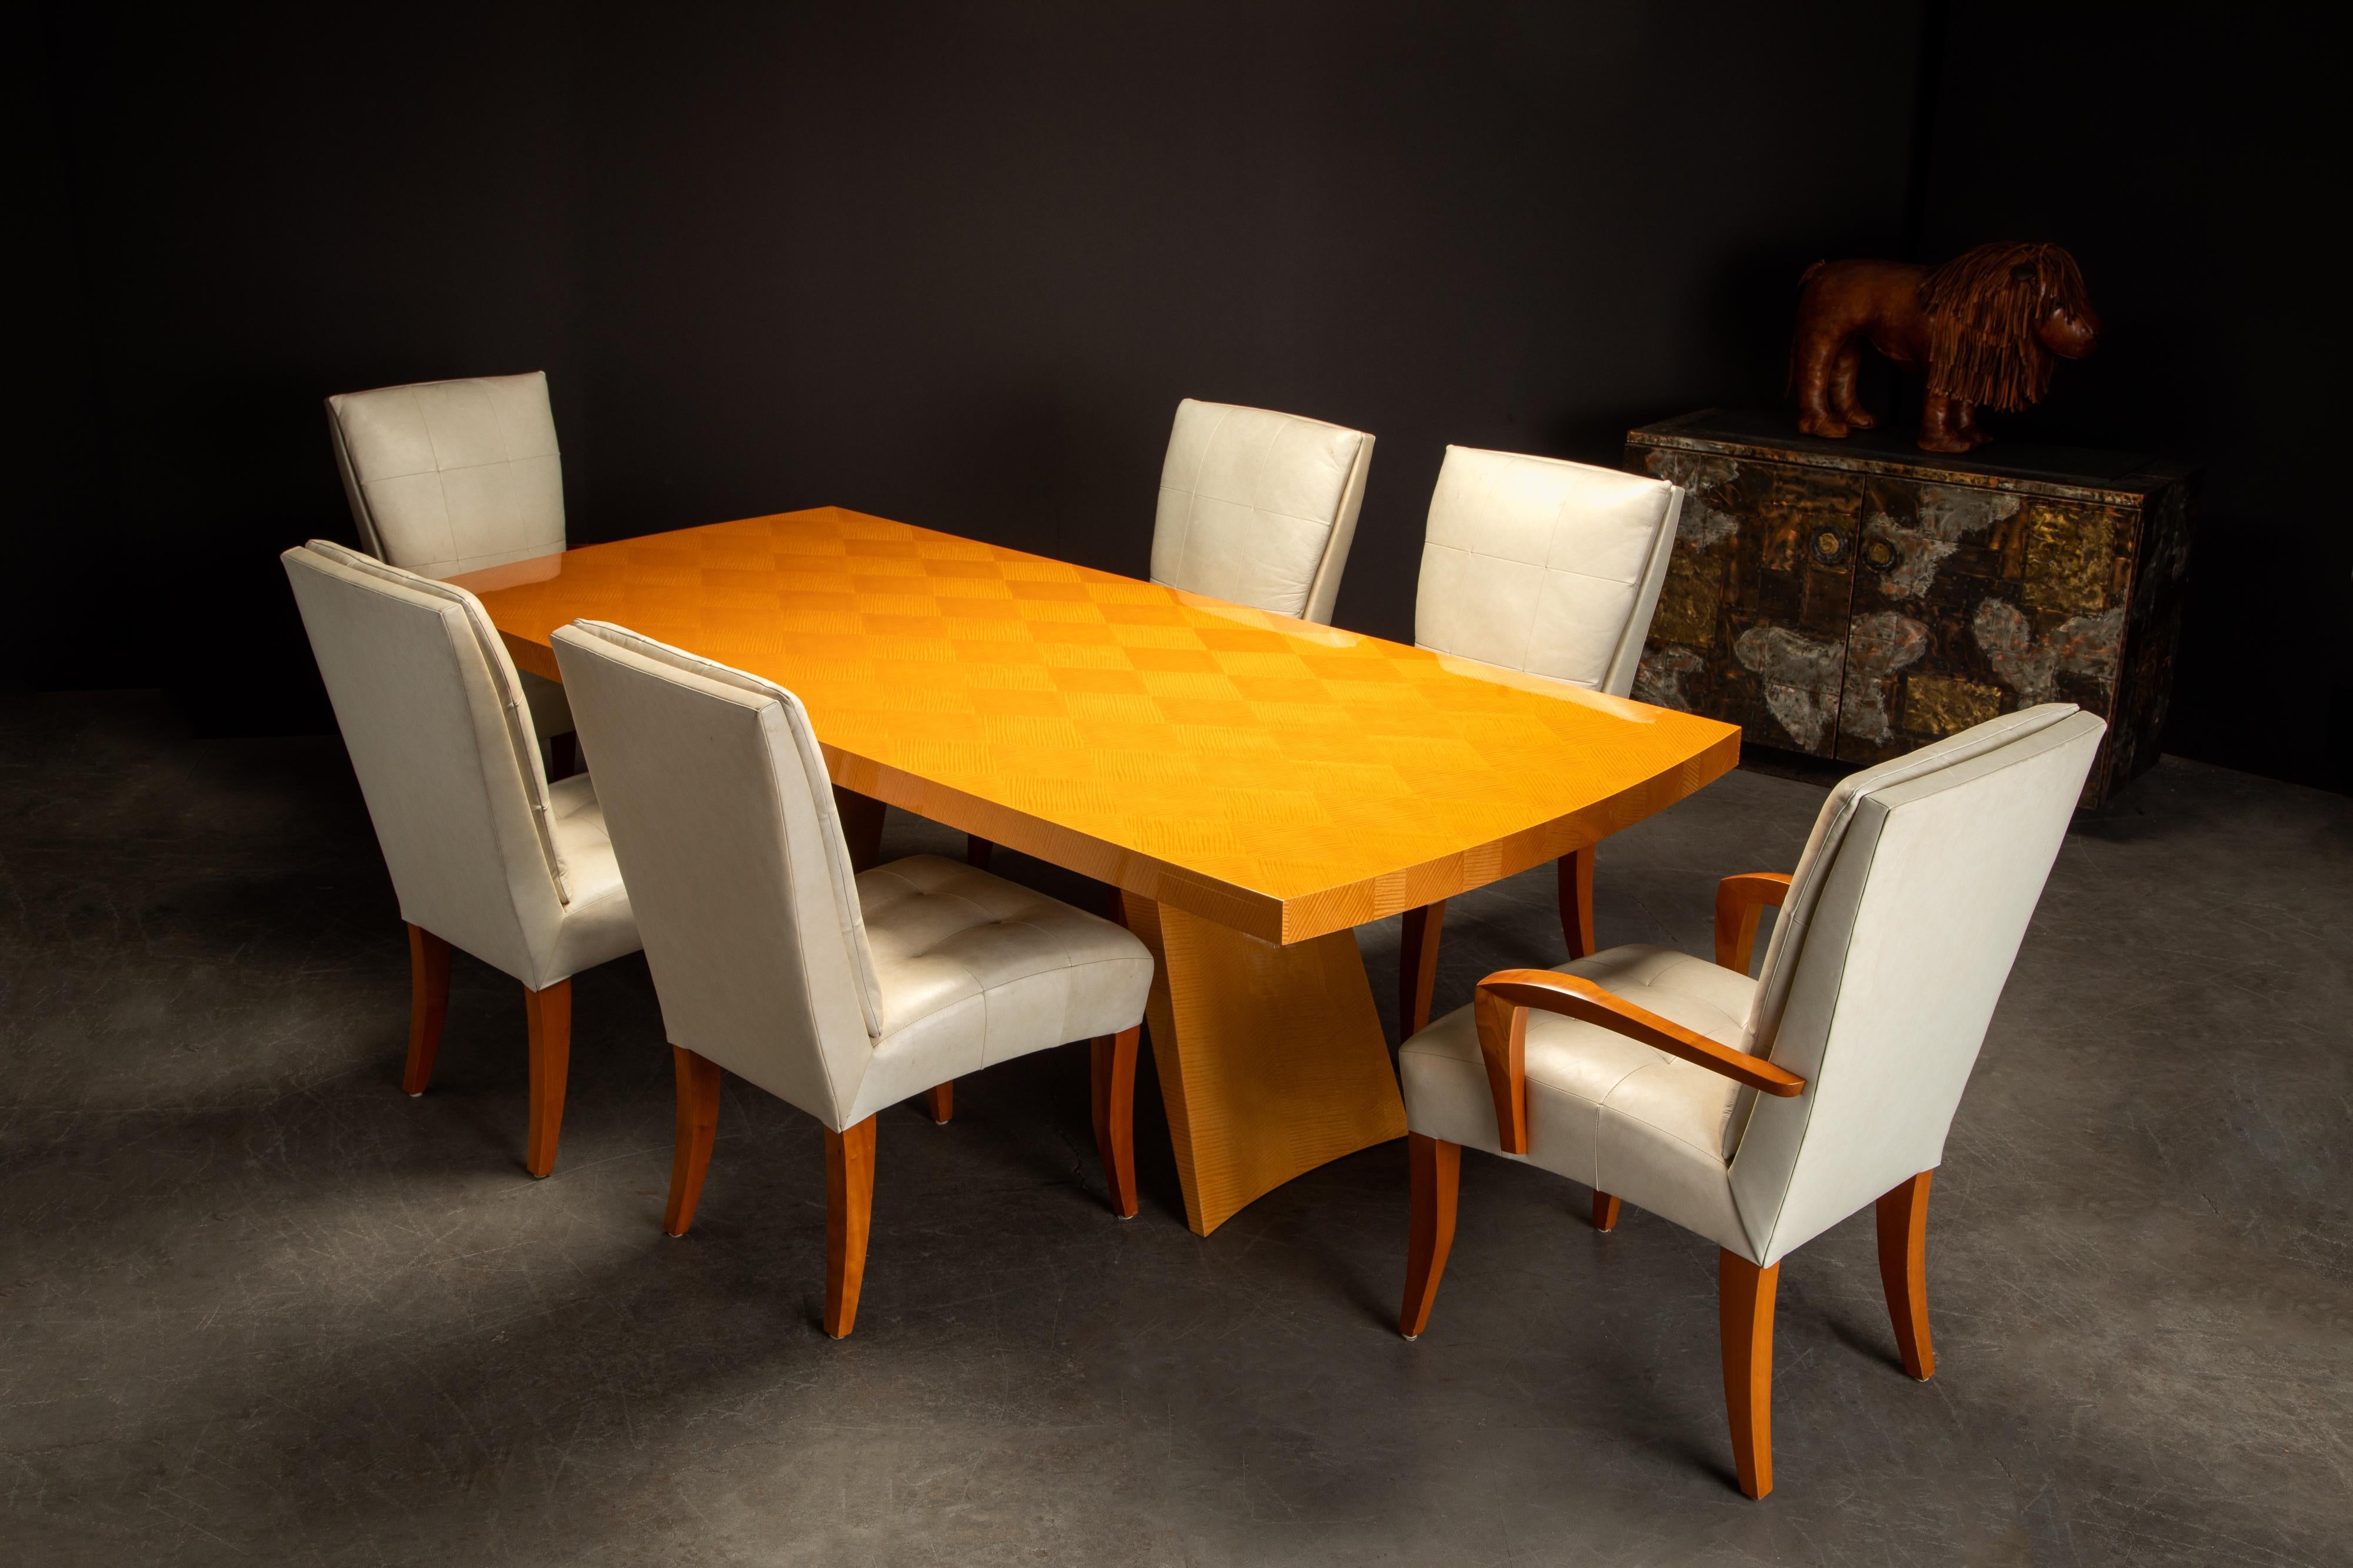 This incredible exotic wood and leather dining set, which would also make an amazing conference table and chair set, by luxury design superstar Dakota Jackson includes a 'Wonder' dining table and six 'Puff' dining chairs. Signed under the dining